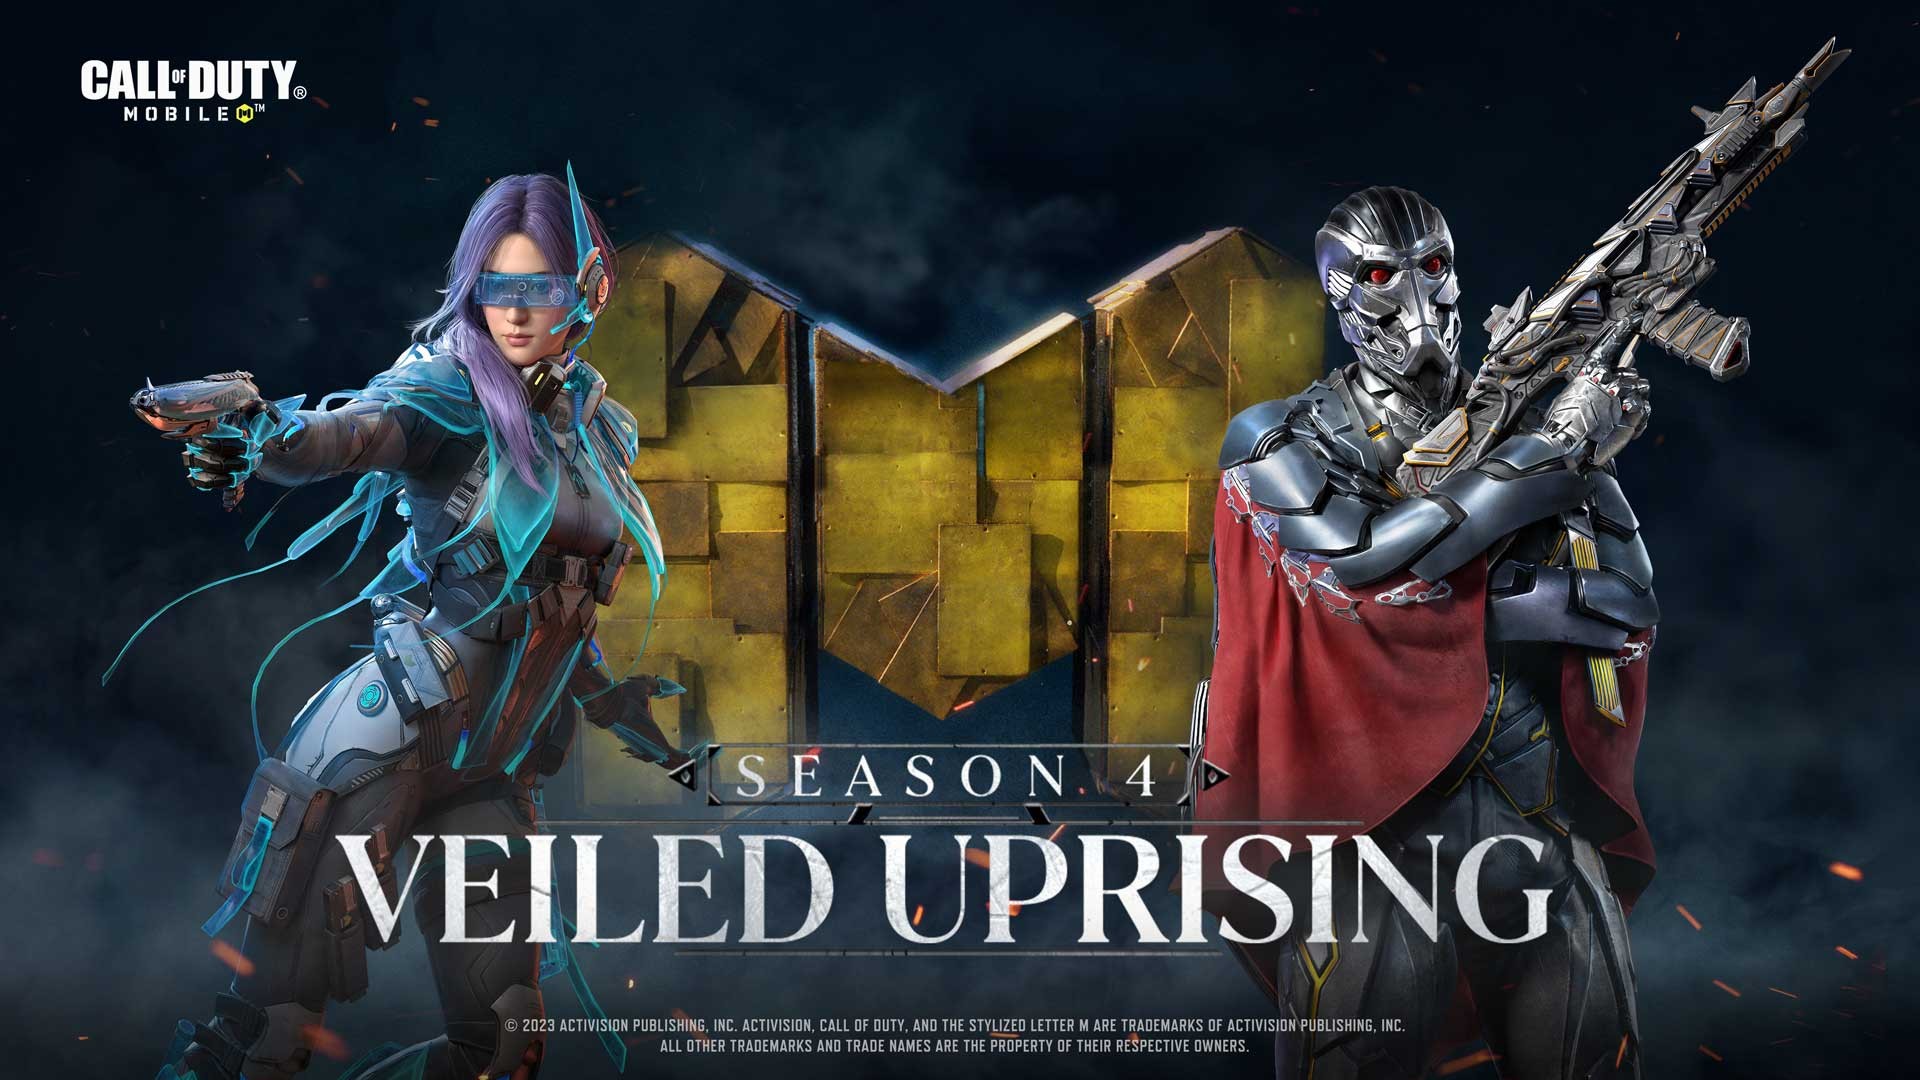 Call of Duty: Mobile – Season 4: Veiled Uprising Begins 27 April; Call of Duty: Mobile World Championship Returns in 2023 with $1.3 Million In Prizes